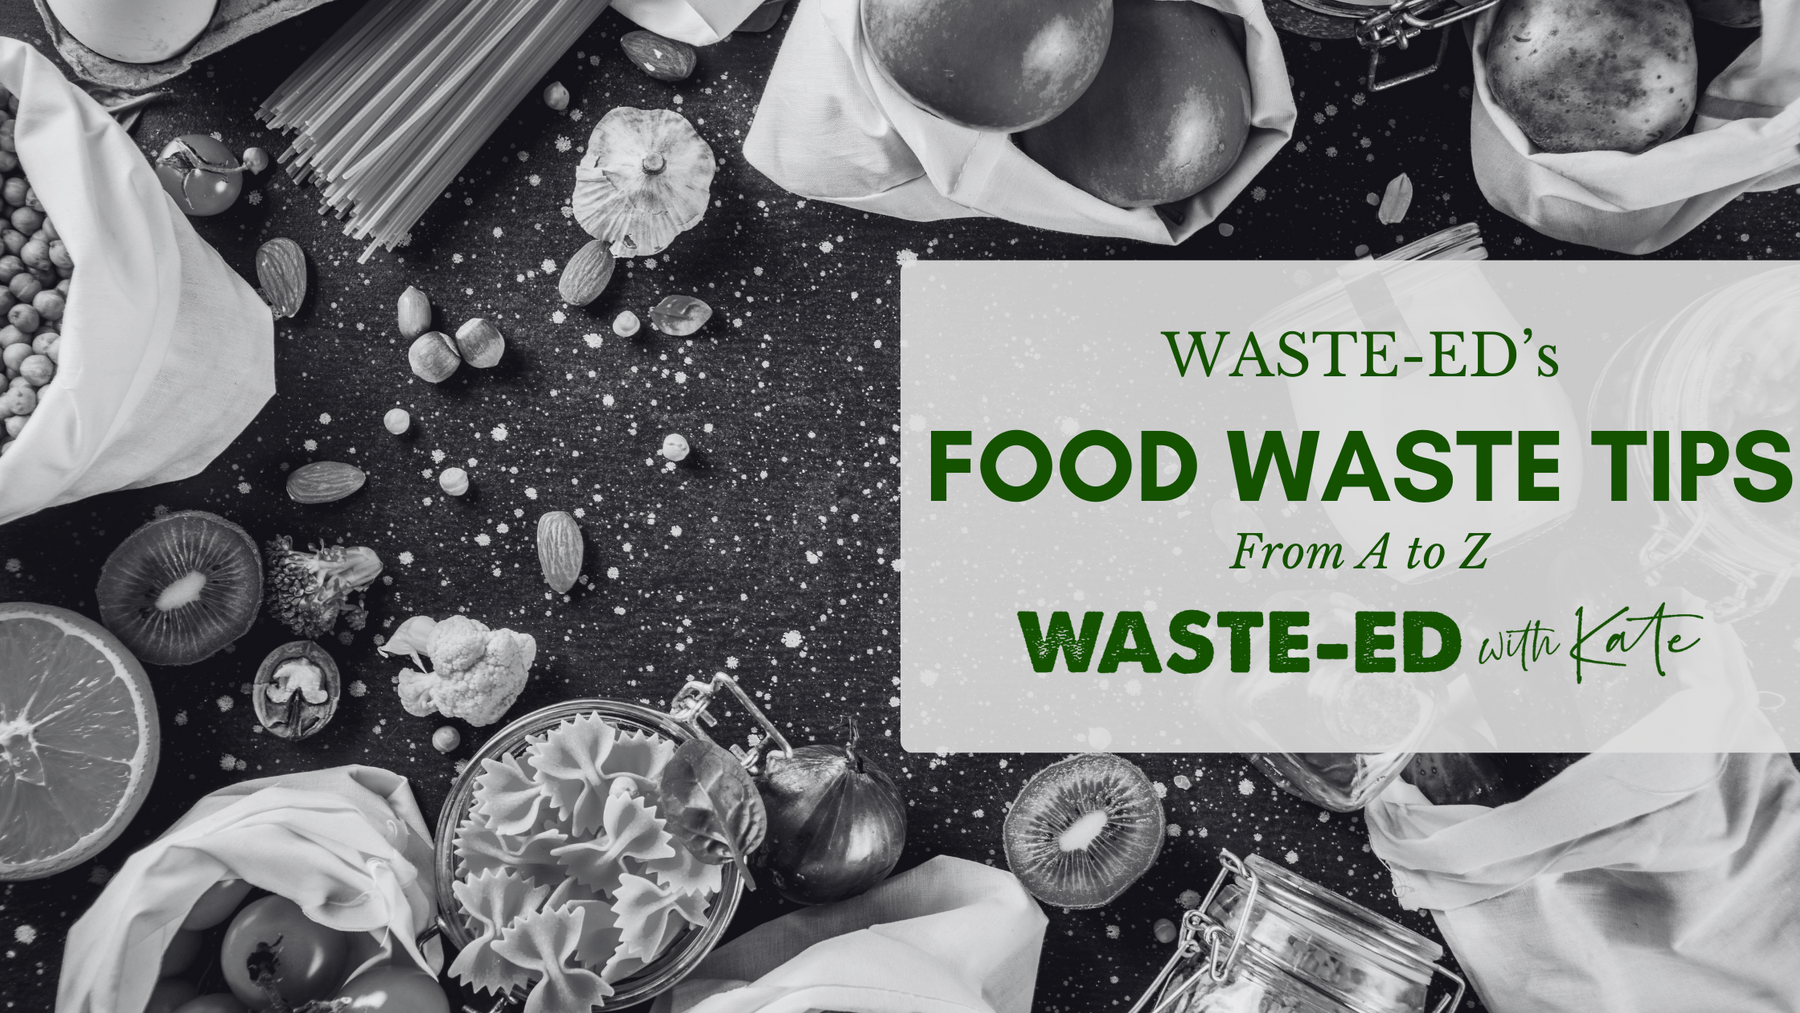 Food Waste Tips from A to Z